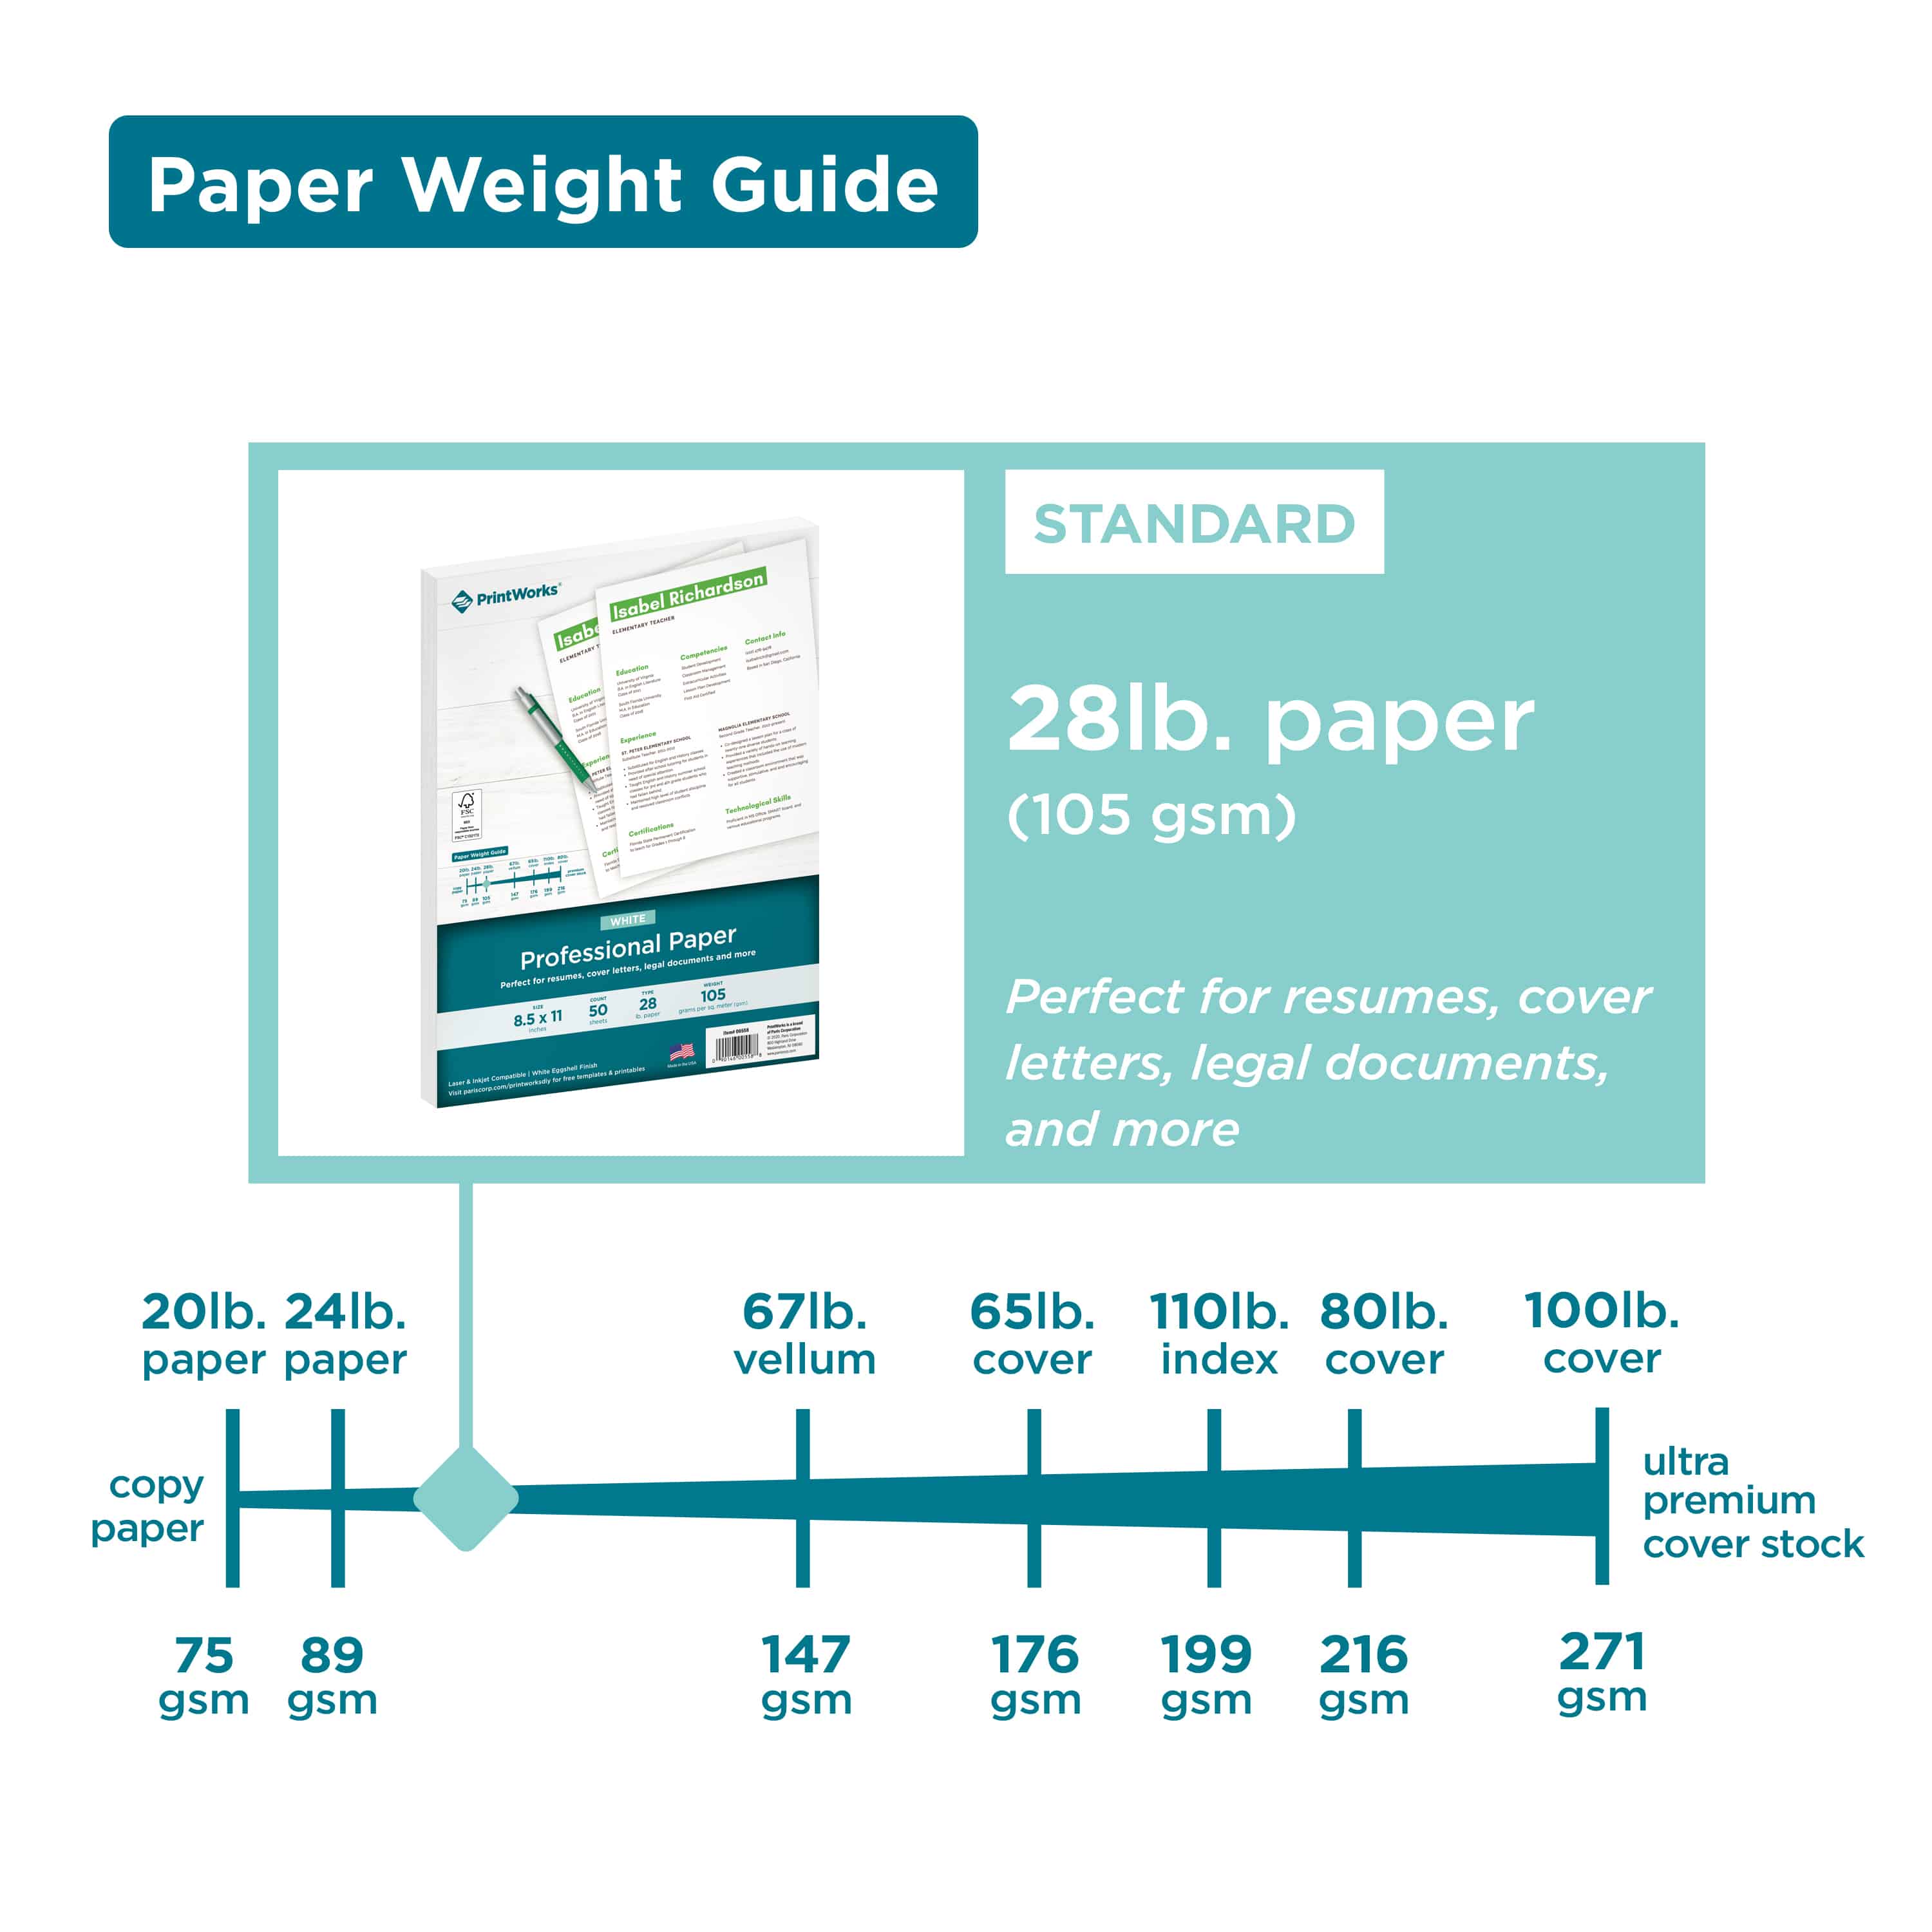 Paper Weight Guide and Best Uses - Paris Corporation